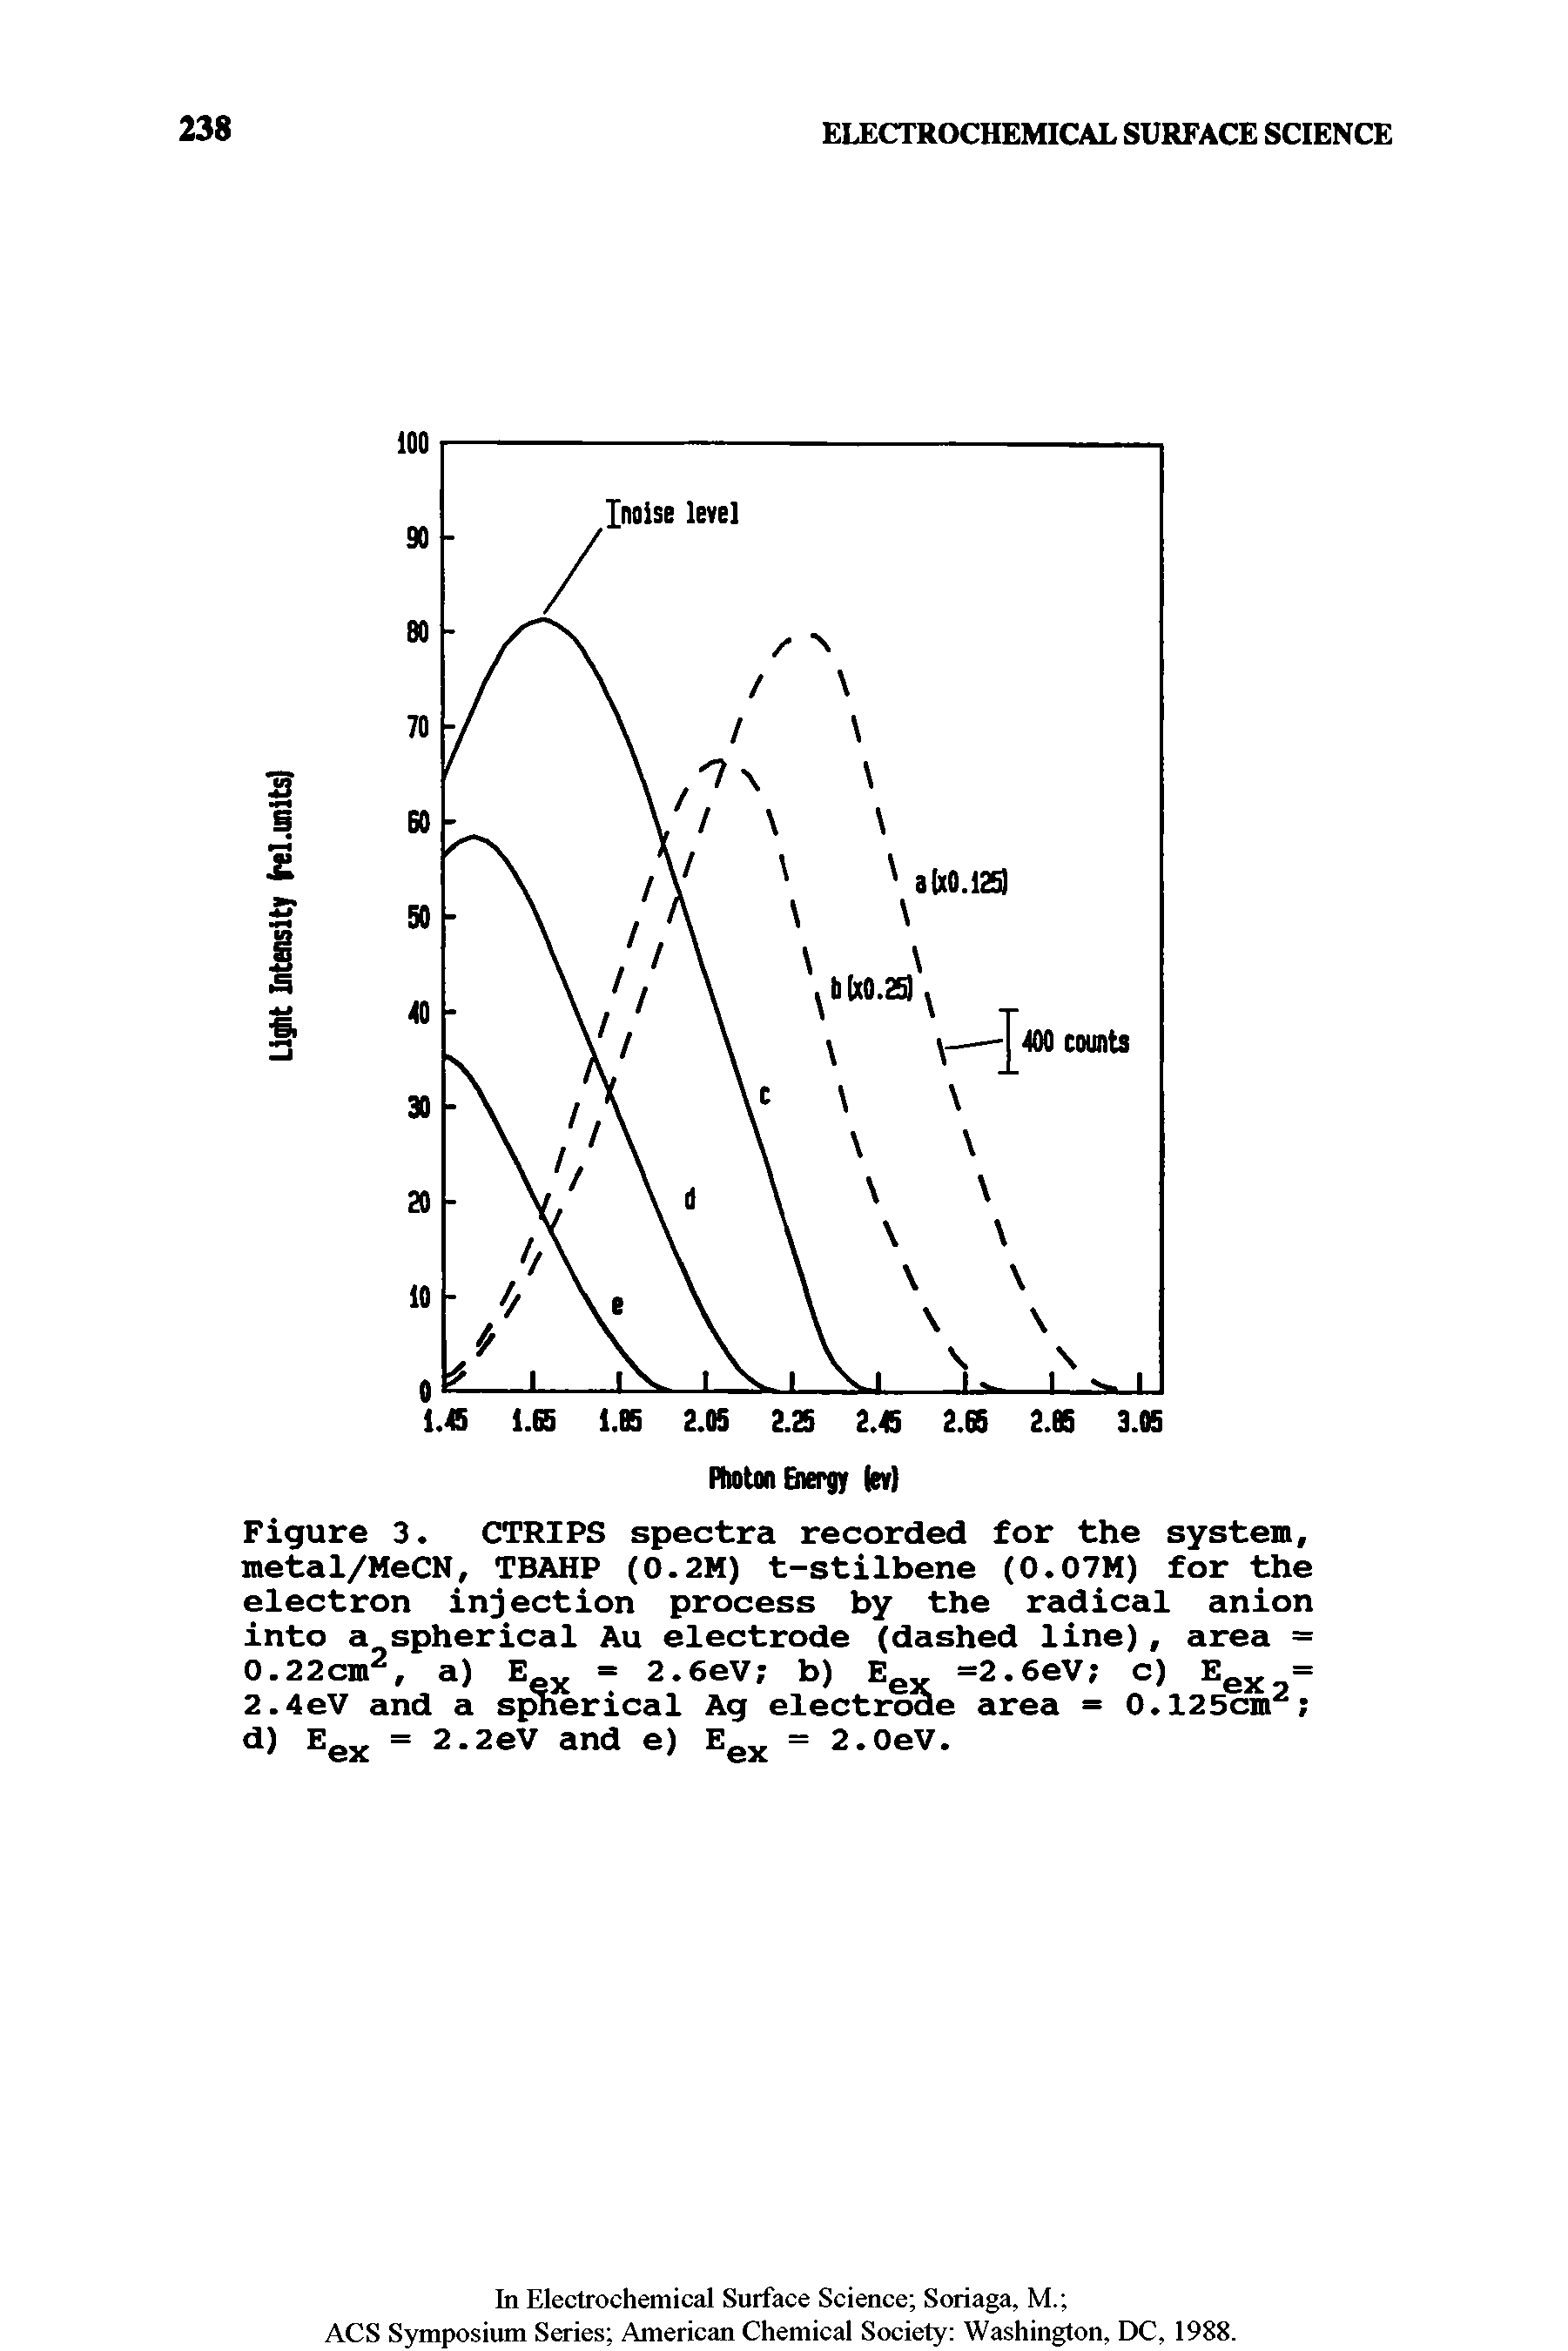 Figure 3. CTRIPS spectra recorded for the system, metal/MeCN, TBAHP (0.2M) t-stilbene (0.07M) for the electron injection process by the radical anion into a spherical Au electrode (dashed line), area = 0.22cm2, a) E x = 2.6eV b) Ee =2.6eV c) Eex = 2.4eV and a spherical Ag electrode area = 0.125cm2 d) Eex = 2.2eV and e) EQV = 2.0eV.